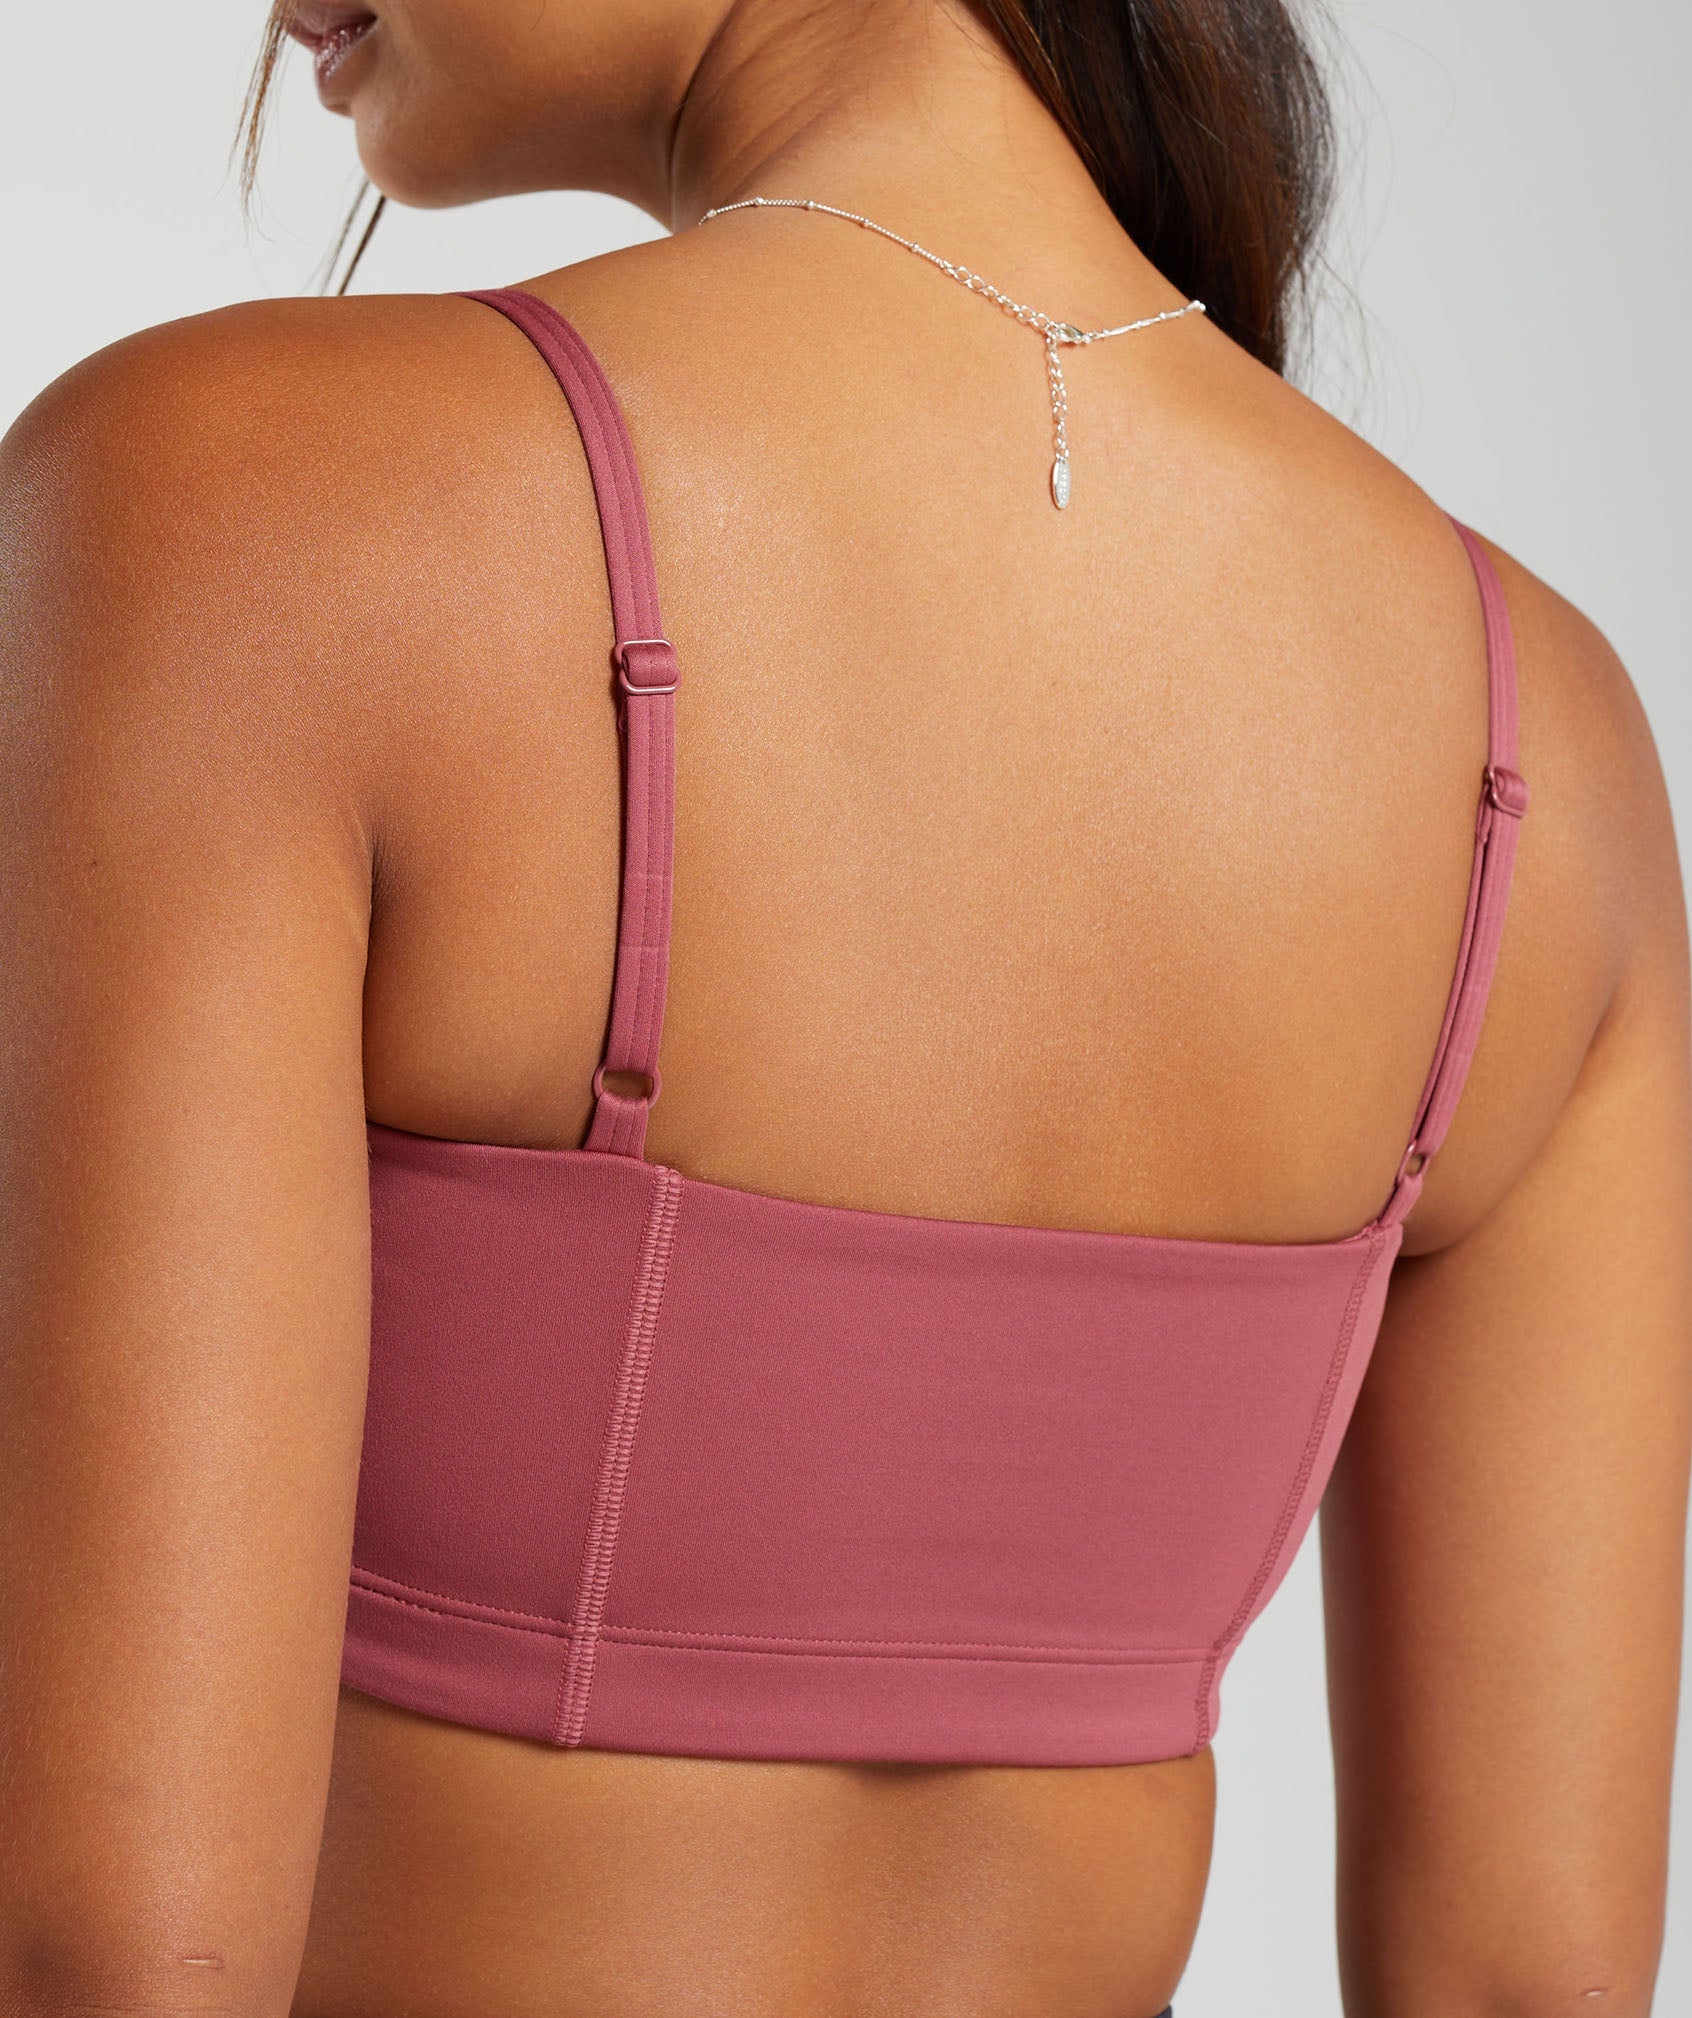 Bandeau Sports Bra in Soft Berry - view 6